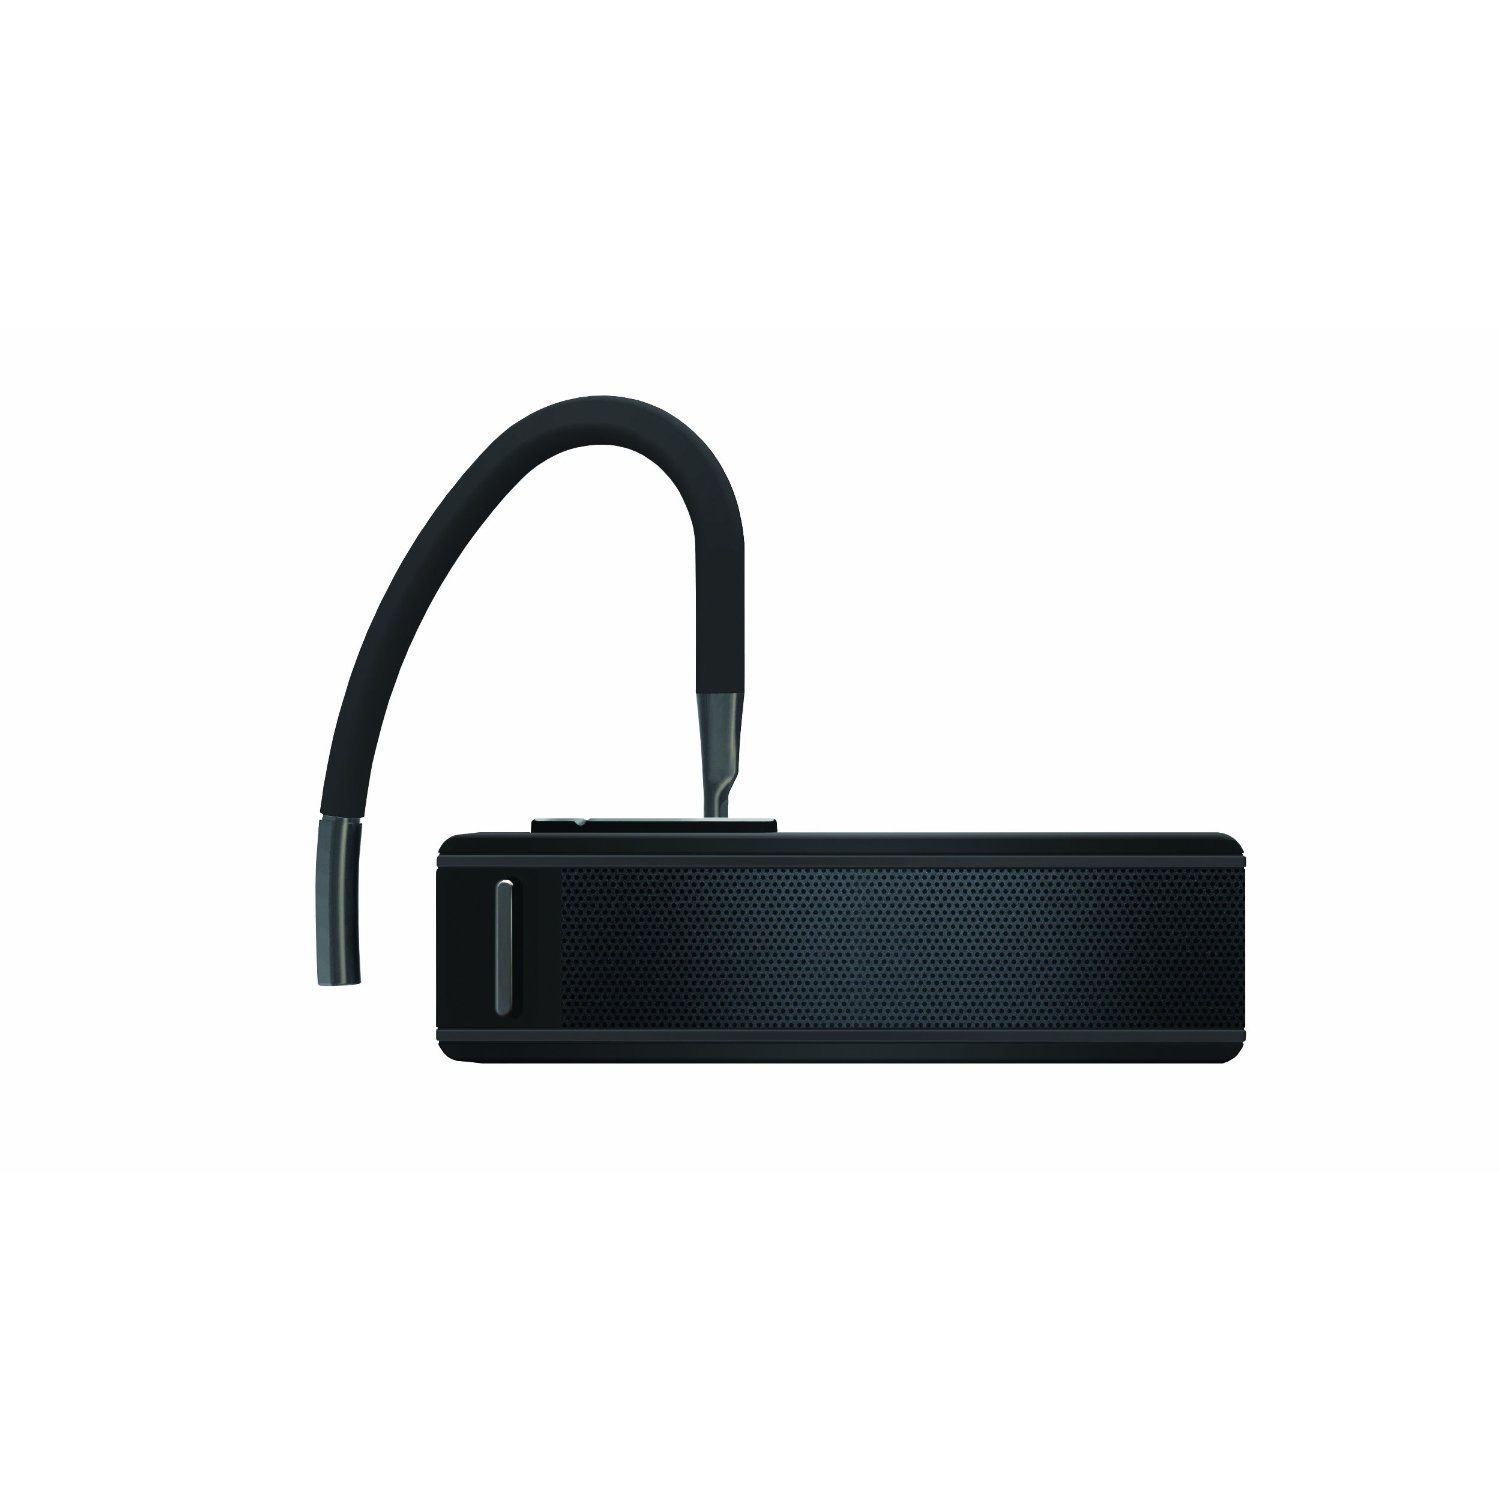 BlueAnt Q2 Voice-Controlled Bluetooth Headset